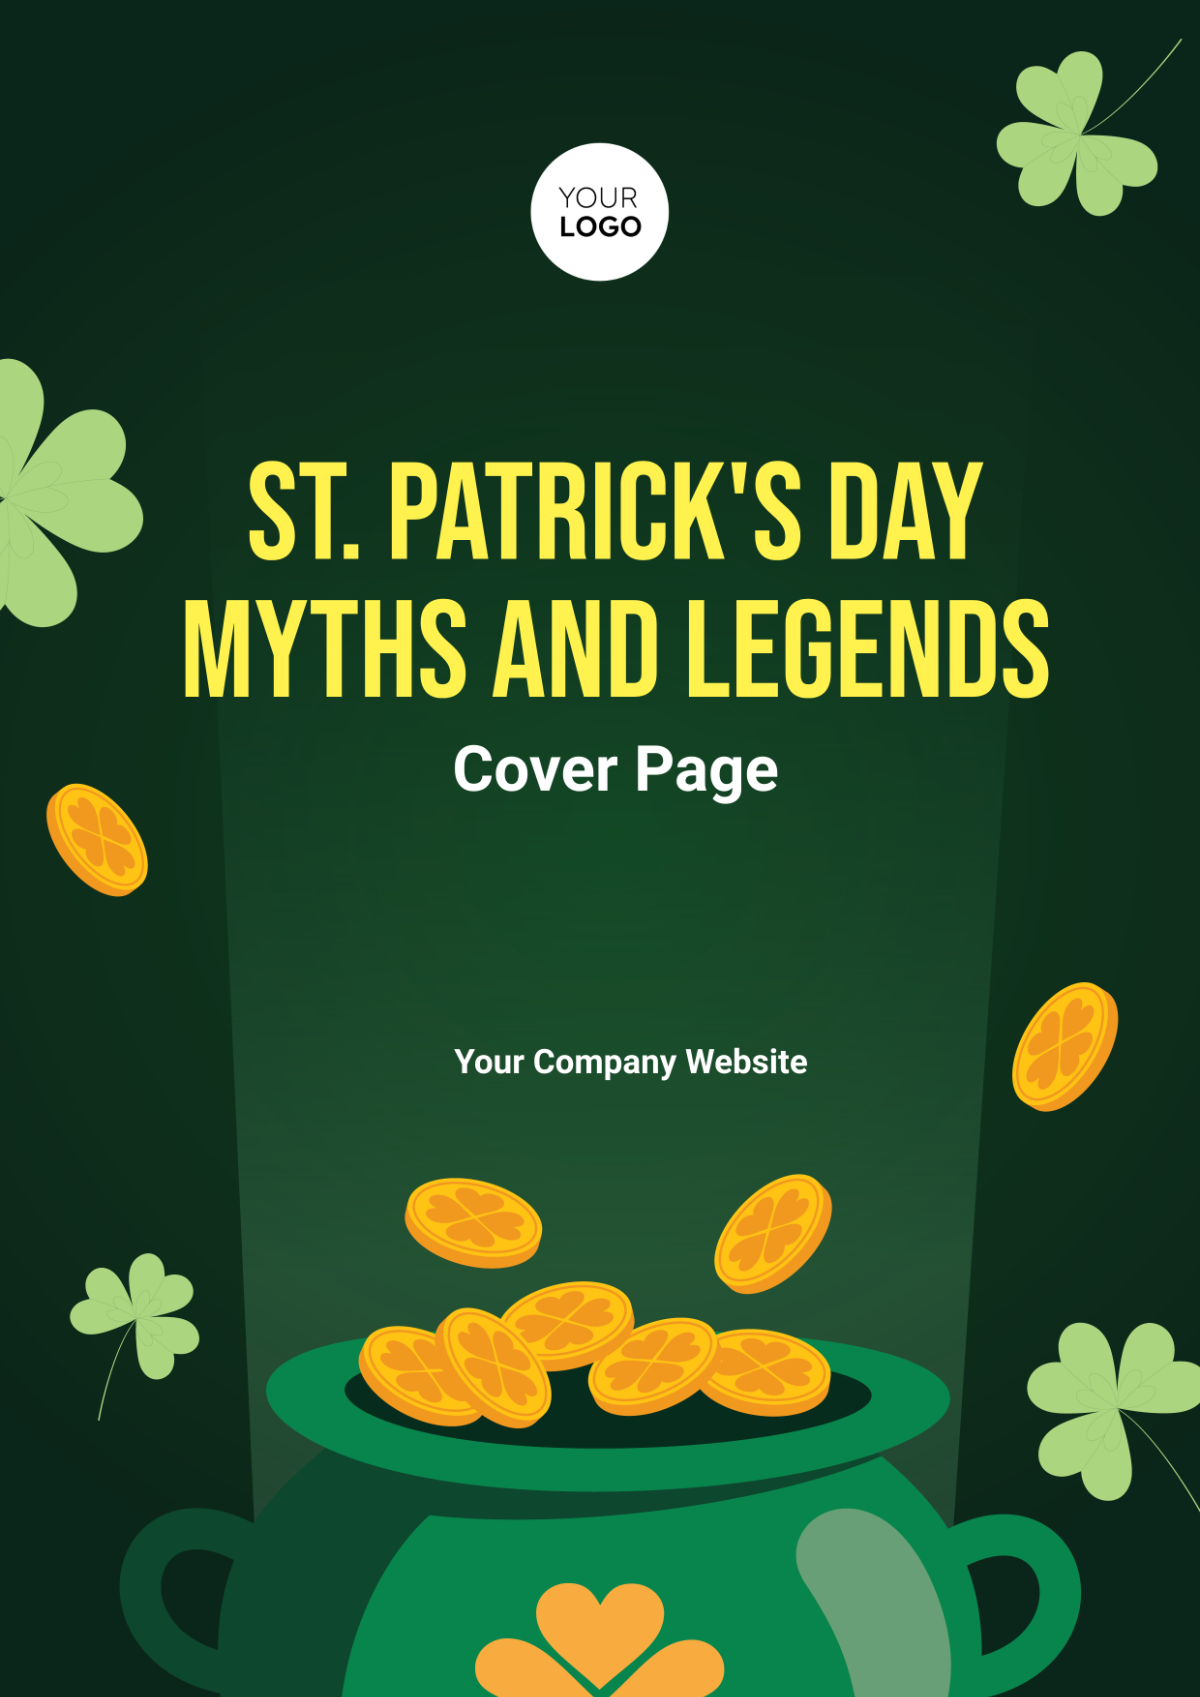 St. Patrick's Day Myths and Legends Cover Page